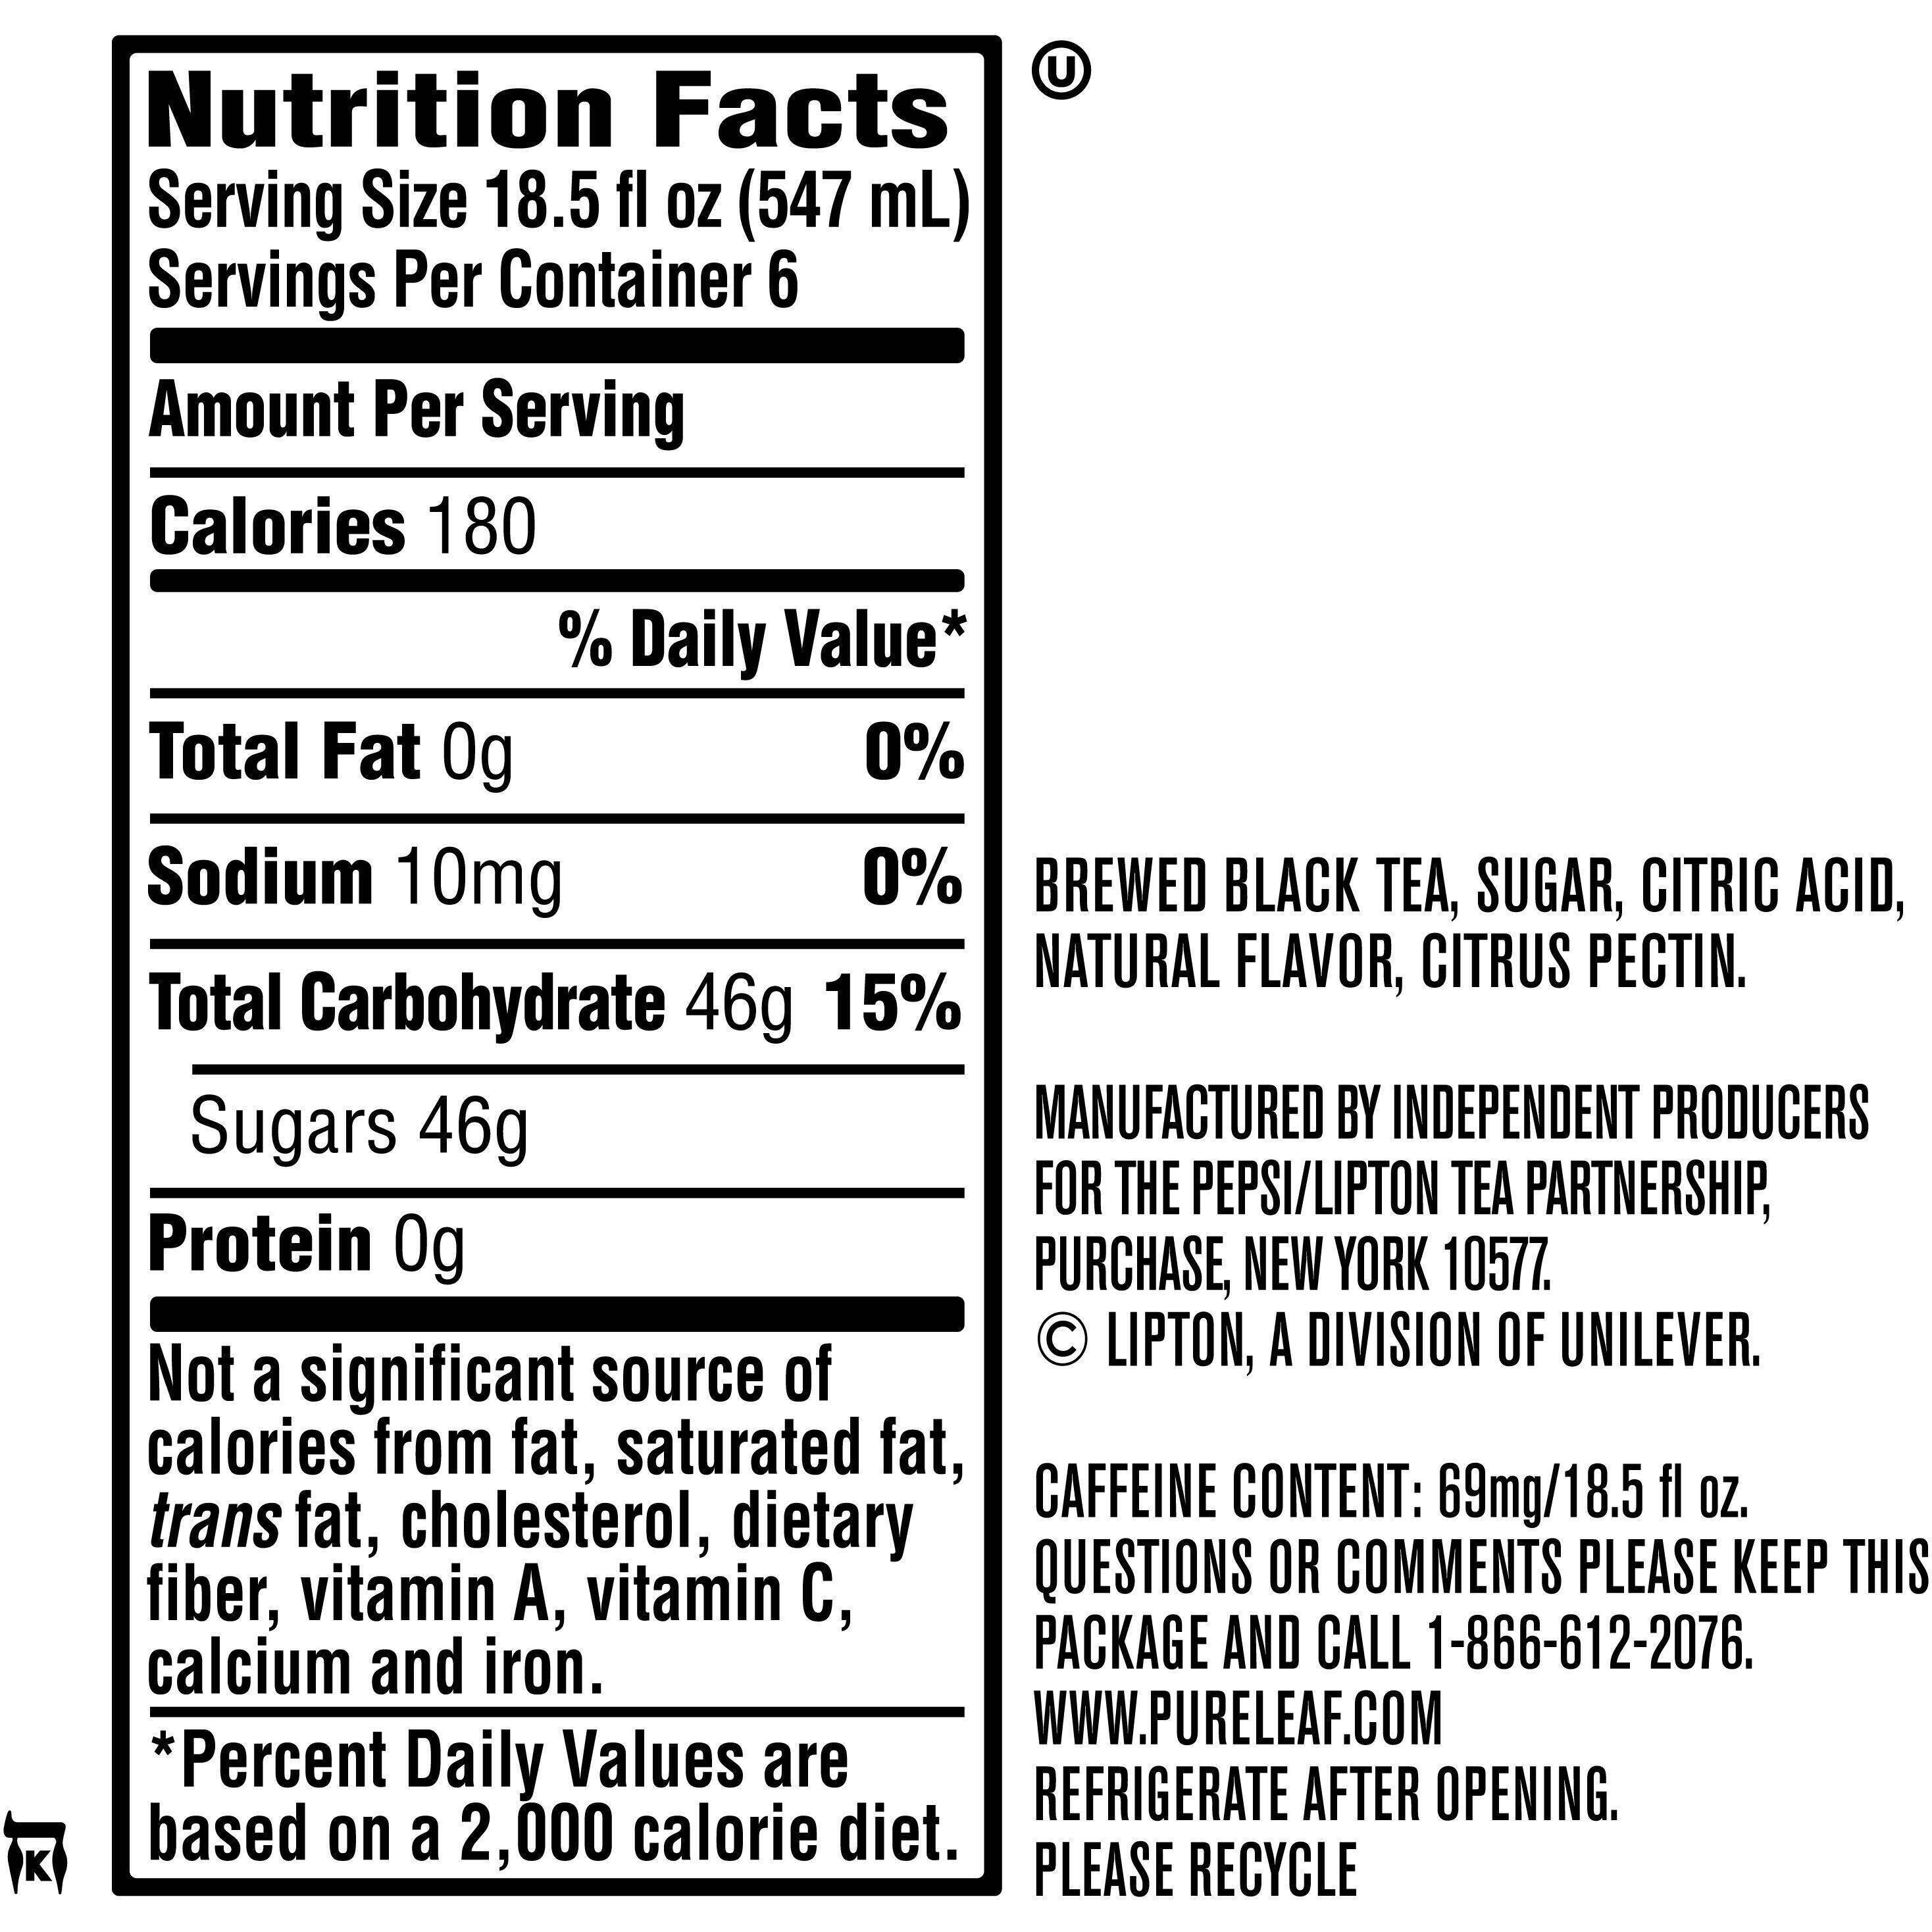 Image describing nutrition information for product Pure Leaf Raspberry